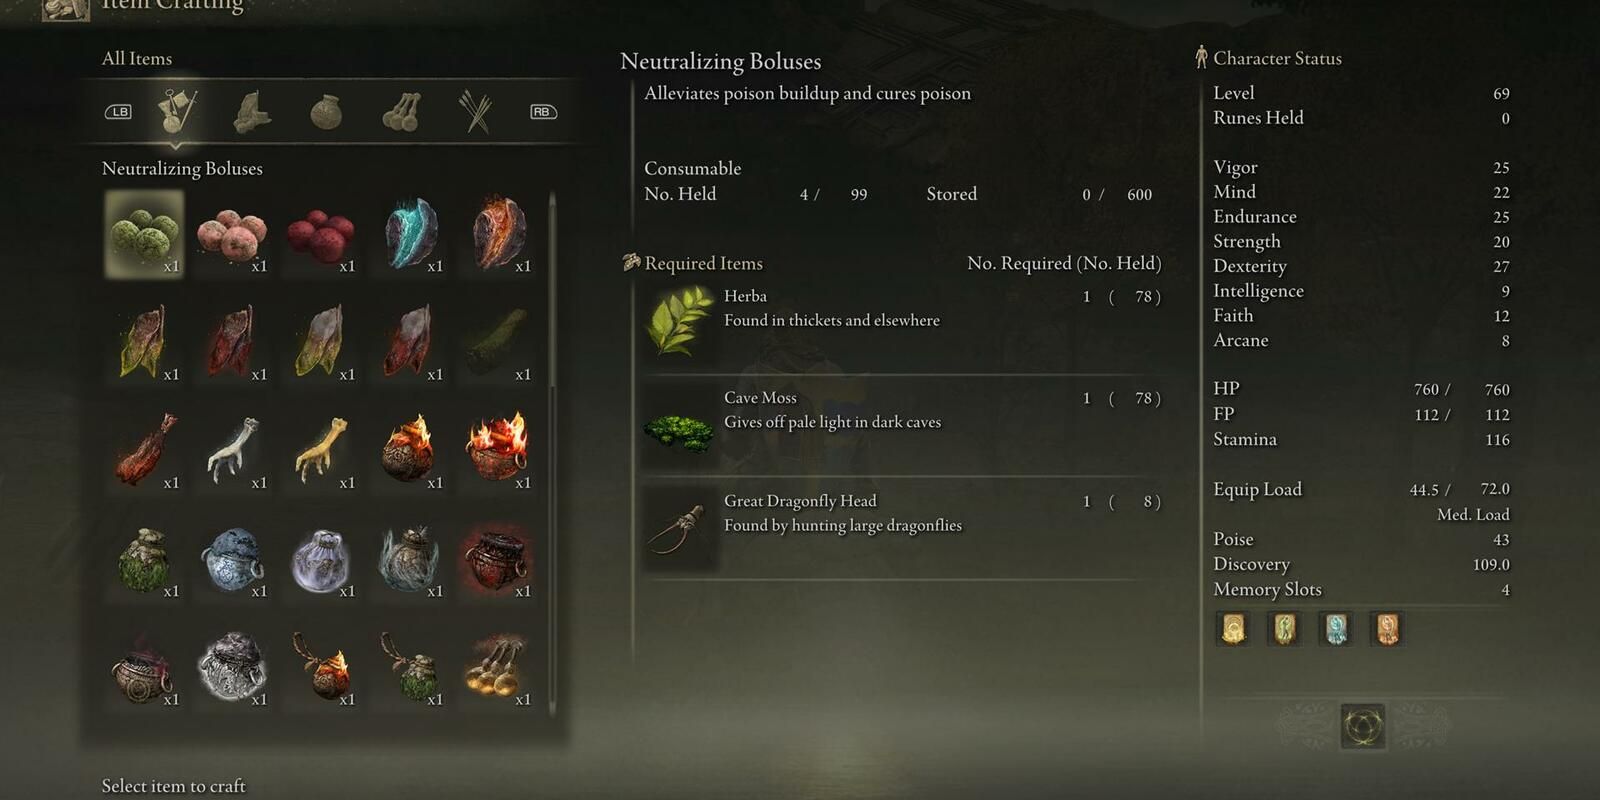 A screenshot of the crafting screen in Elden Ring